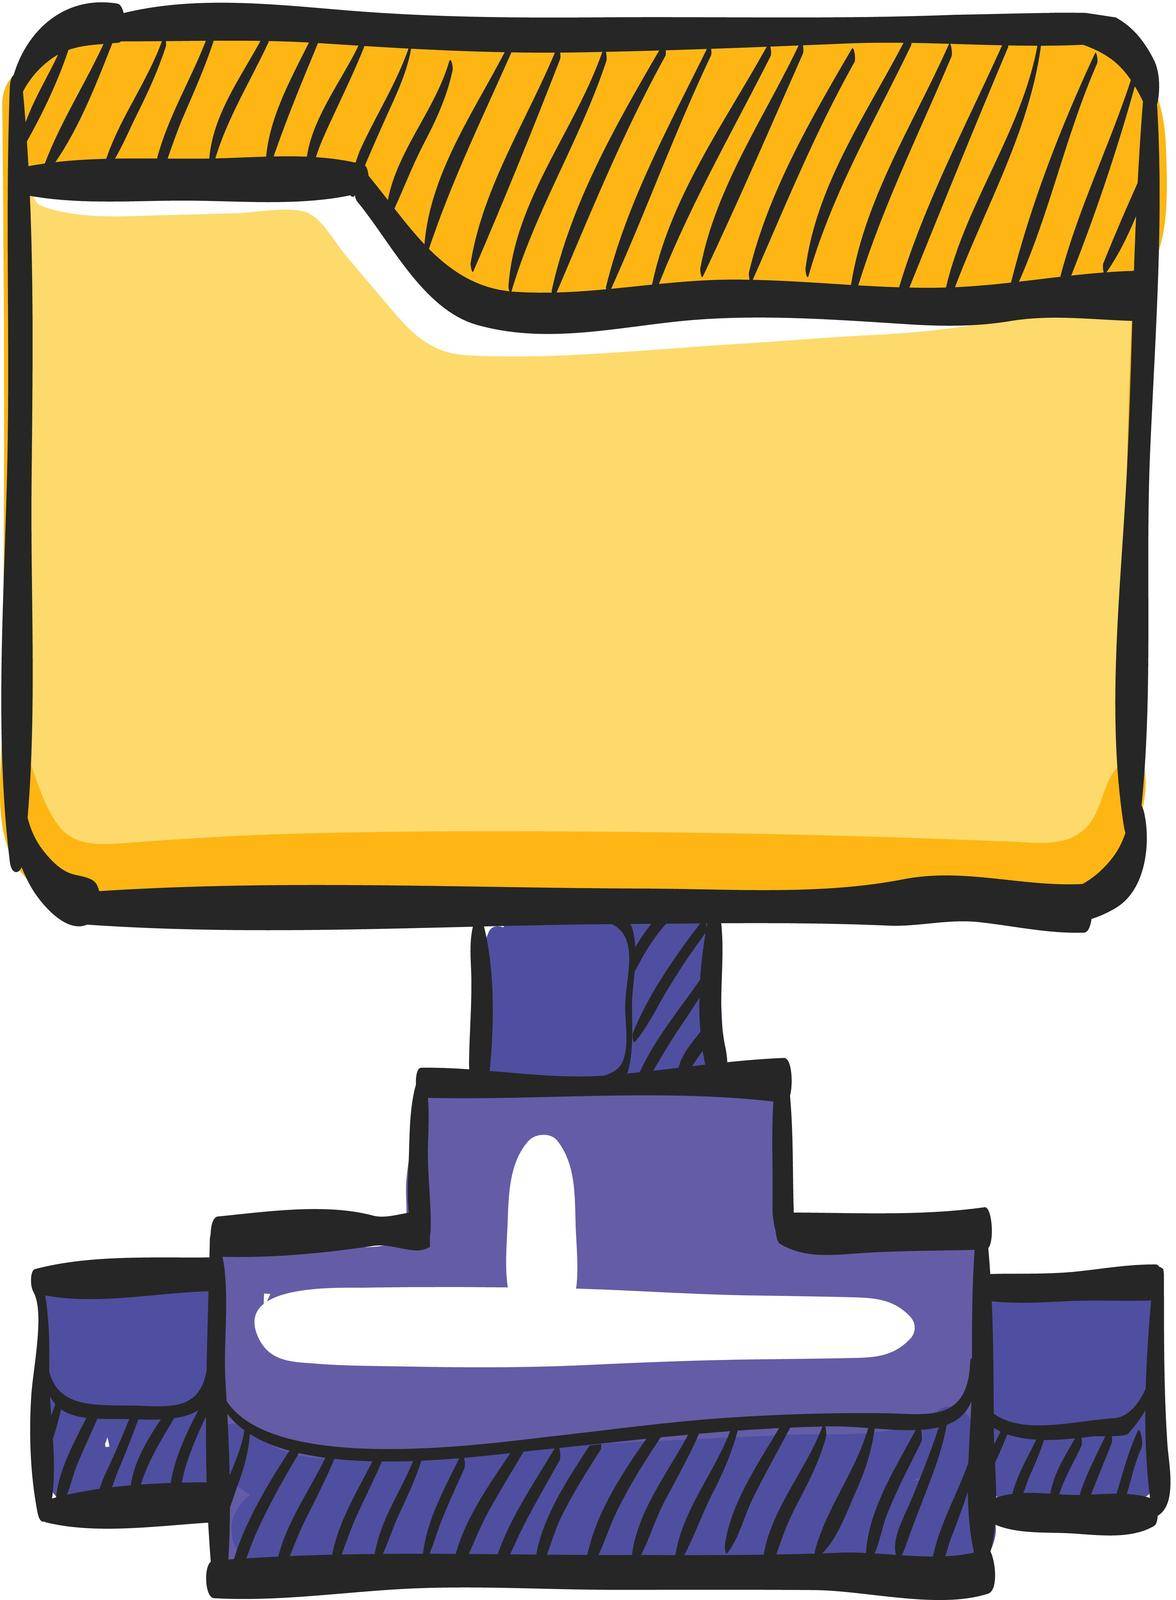 Shared folder icon in color drawing. Computer network, file sharing 